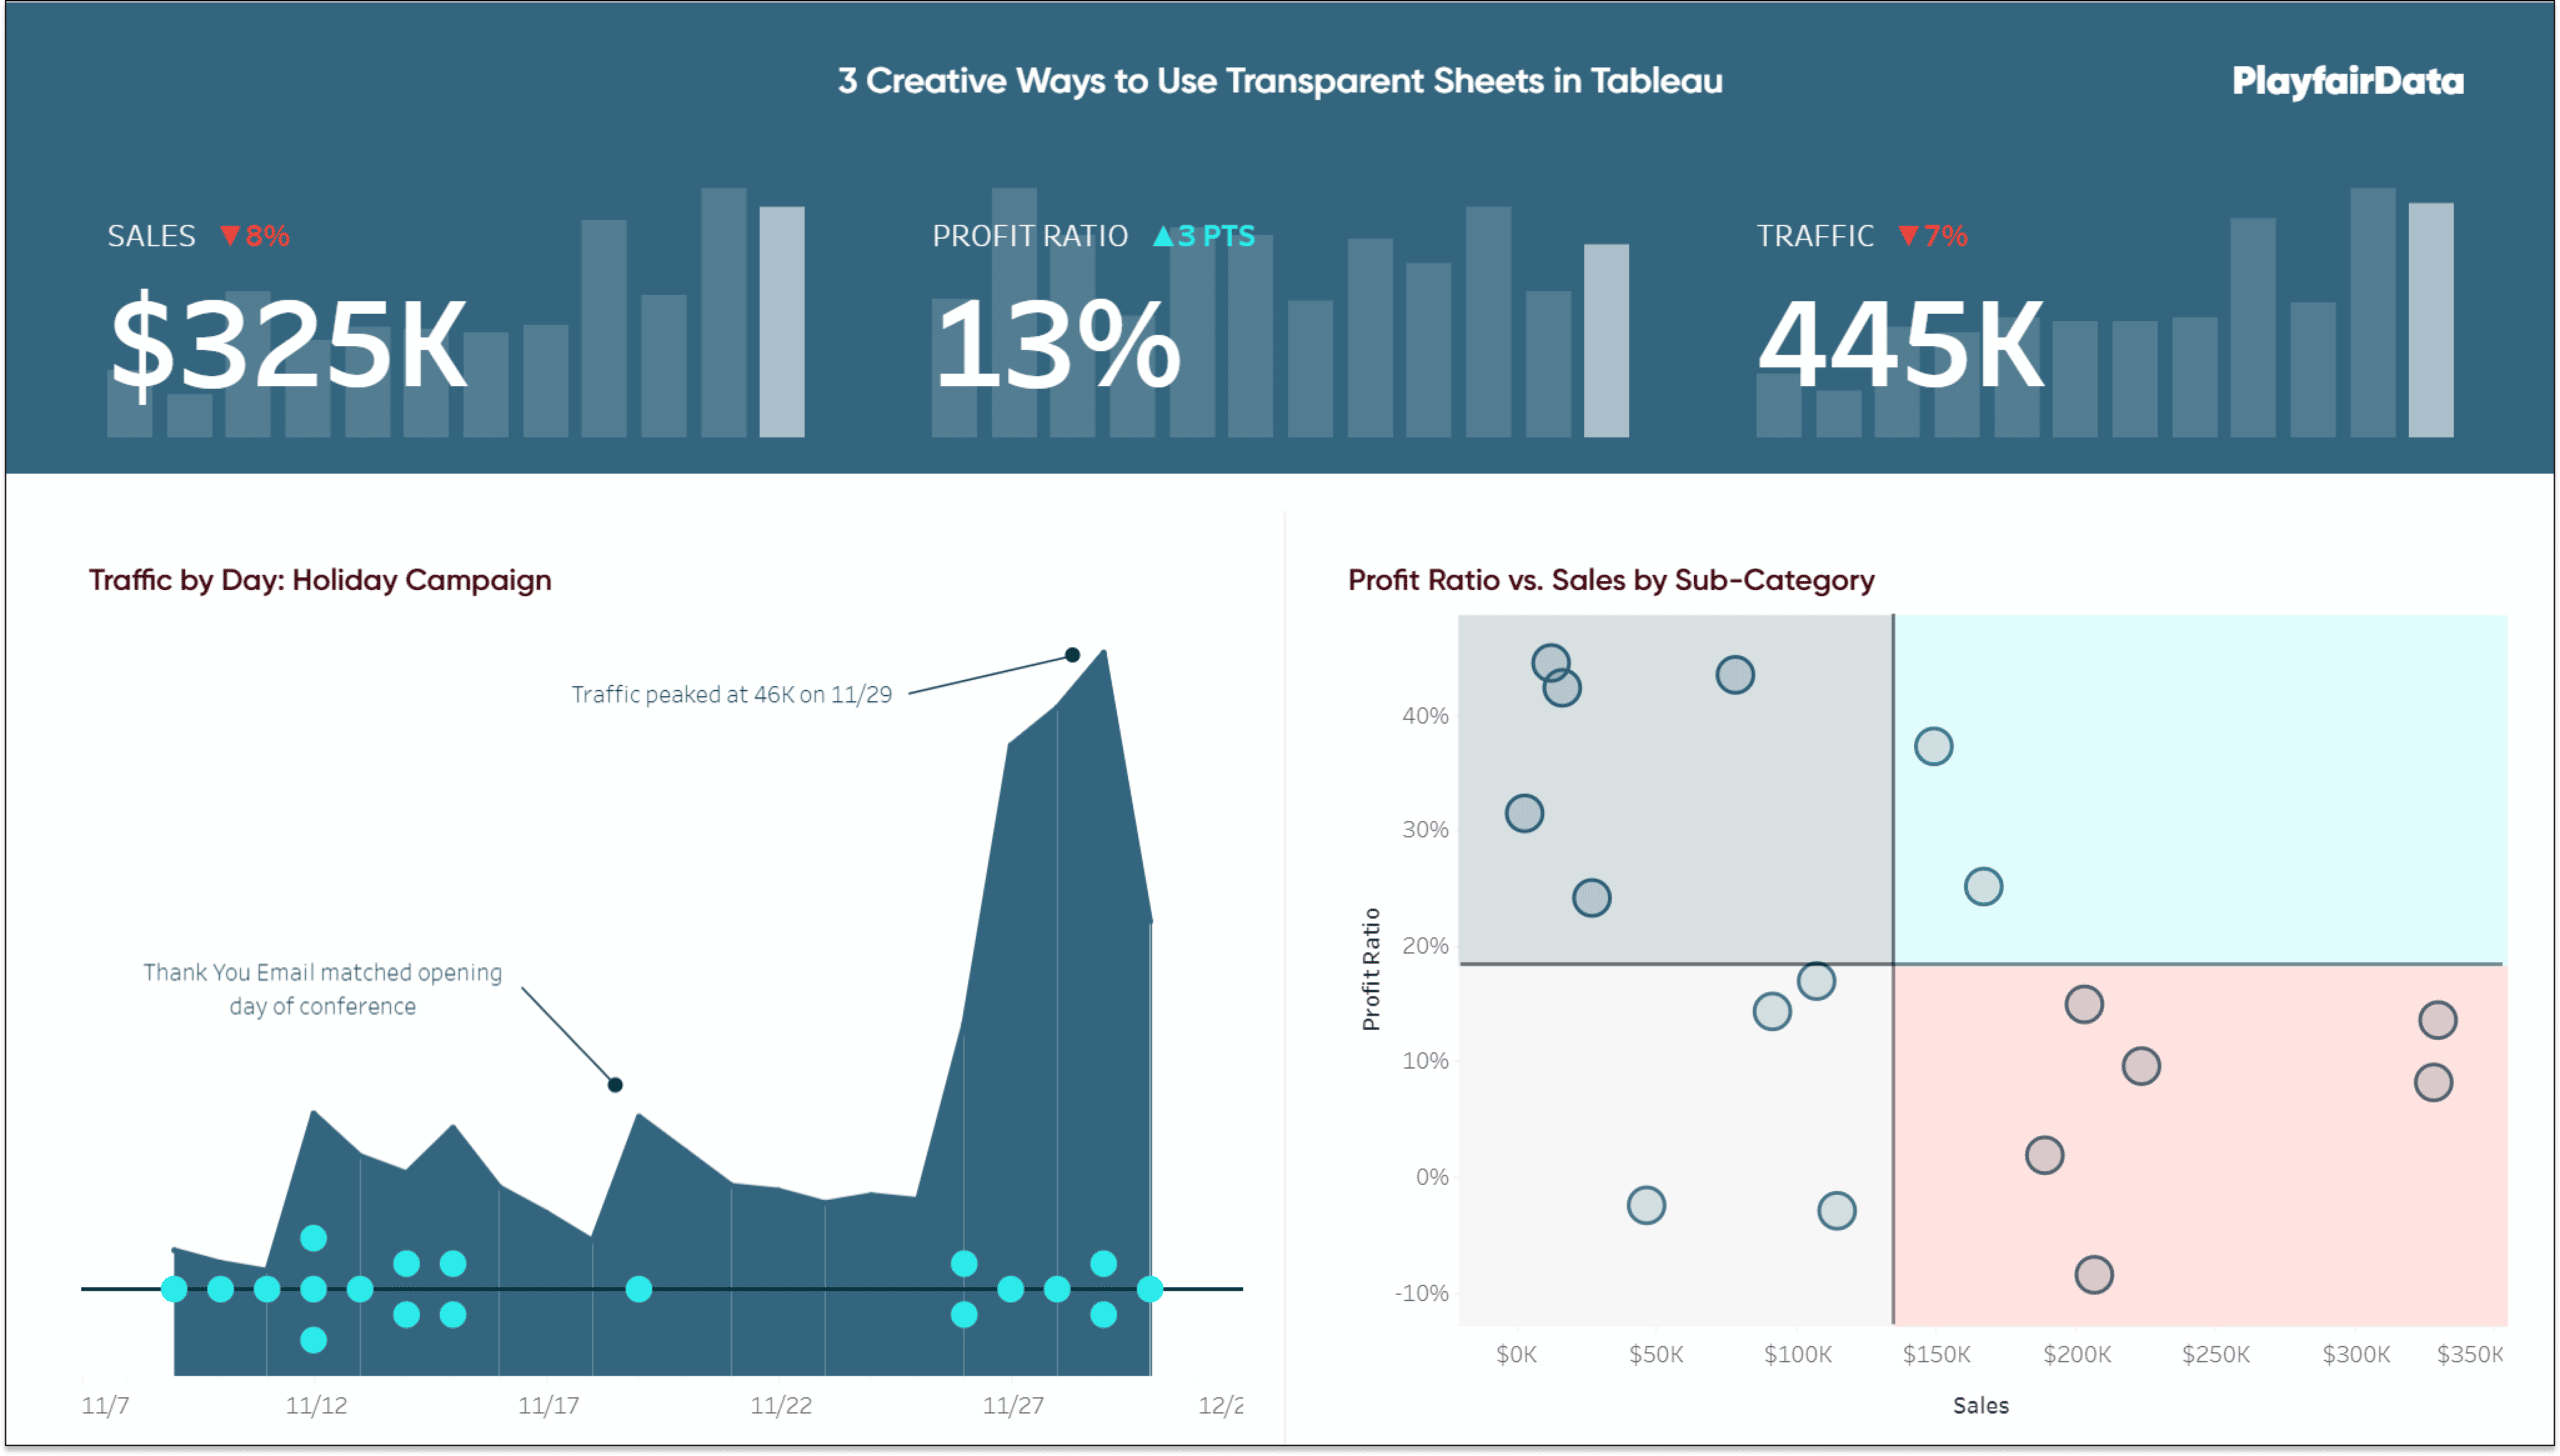 Express your data artistry with transparent worksheets in Tableau